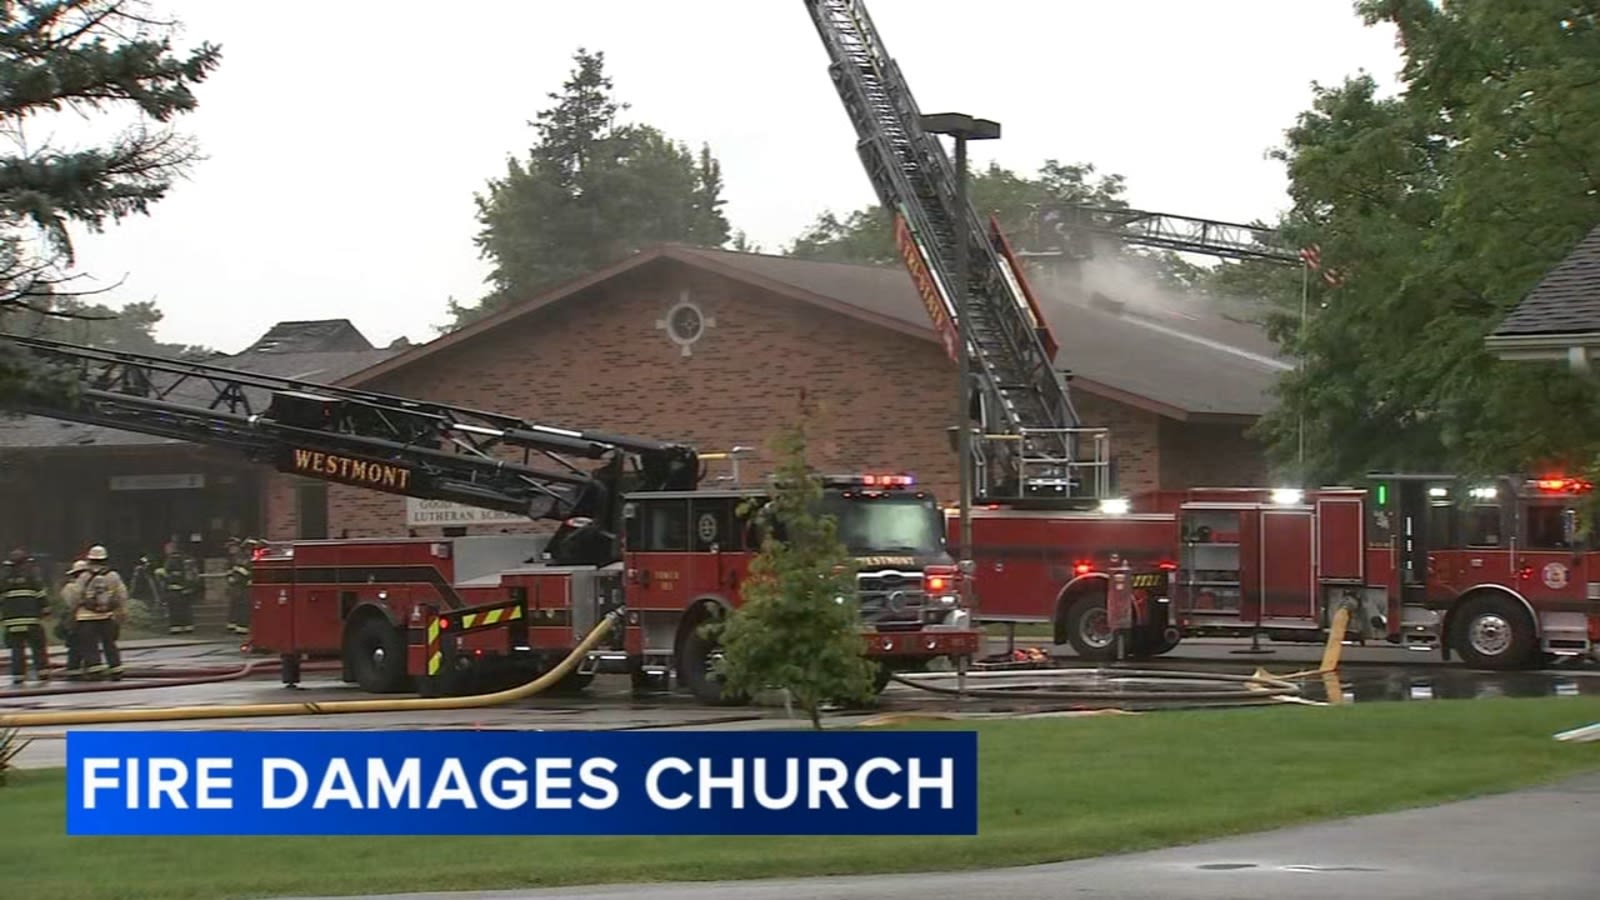 Good Shepherd Church damaged in Downers Grove fire, officials say